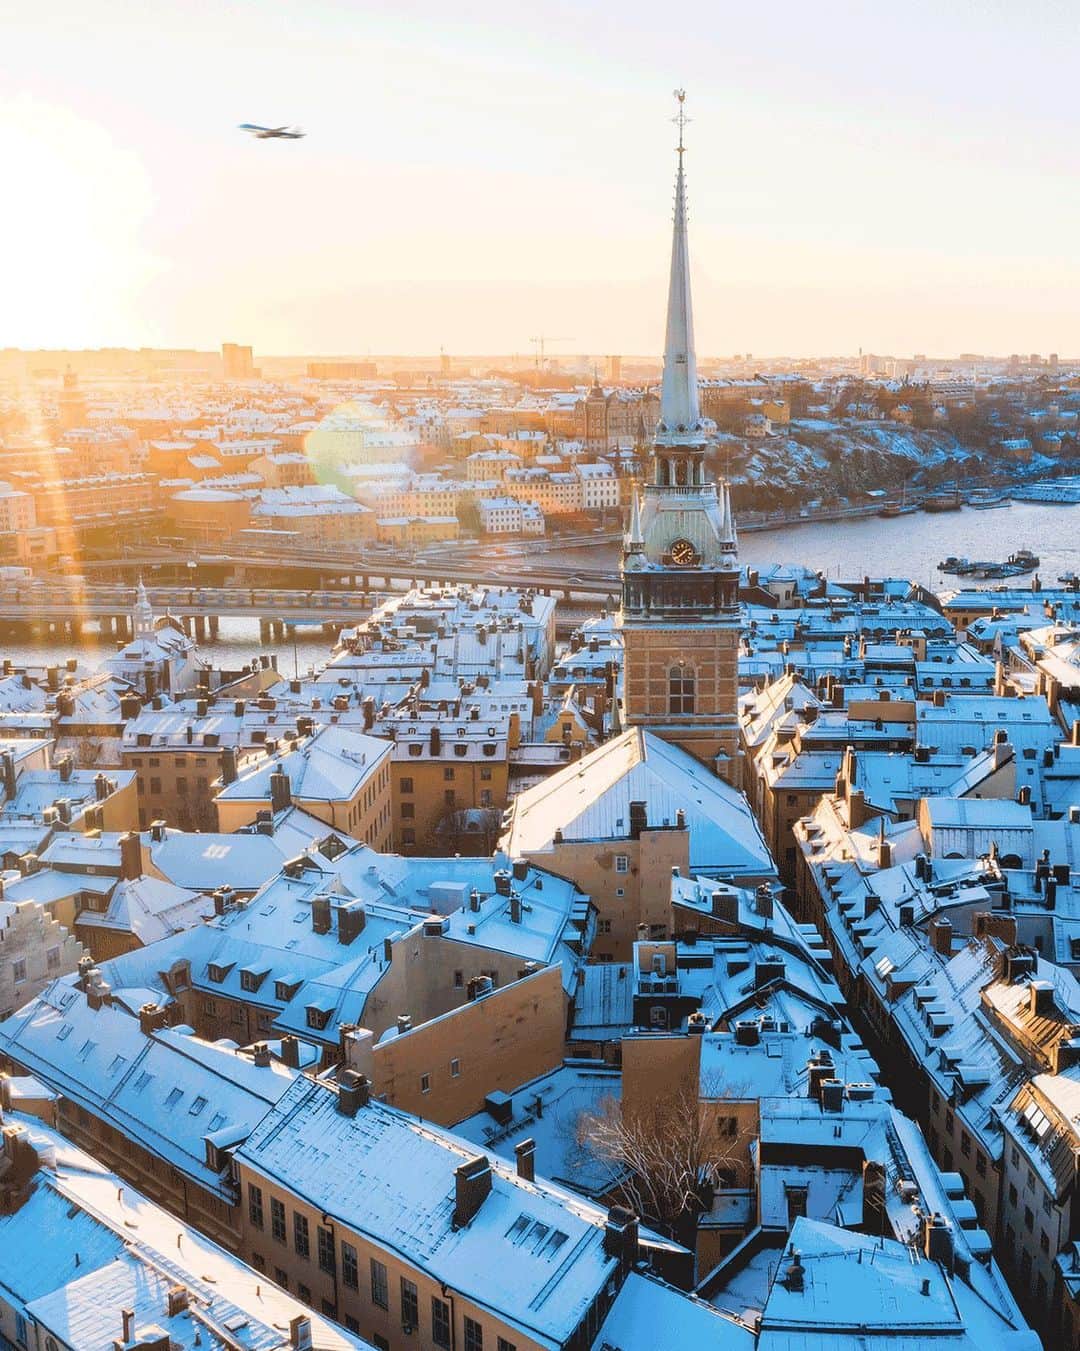 KLMオランダ航空のインスタグラム：「Do you wonder where to land for a winter wonderland?😉 Check out our stories to discover our winter schedule filled with snow-kissed destinations! ❄️✈️ #KLM #royaldutcharilines #winter #winterschedule #winterwonderland #winteriscoming #winterishere #snow #city #citytrip」